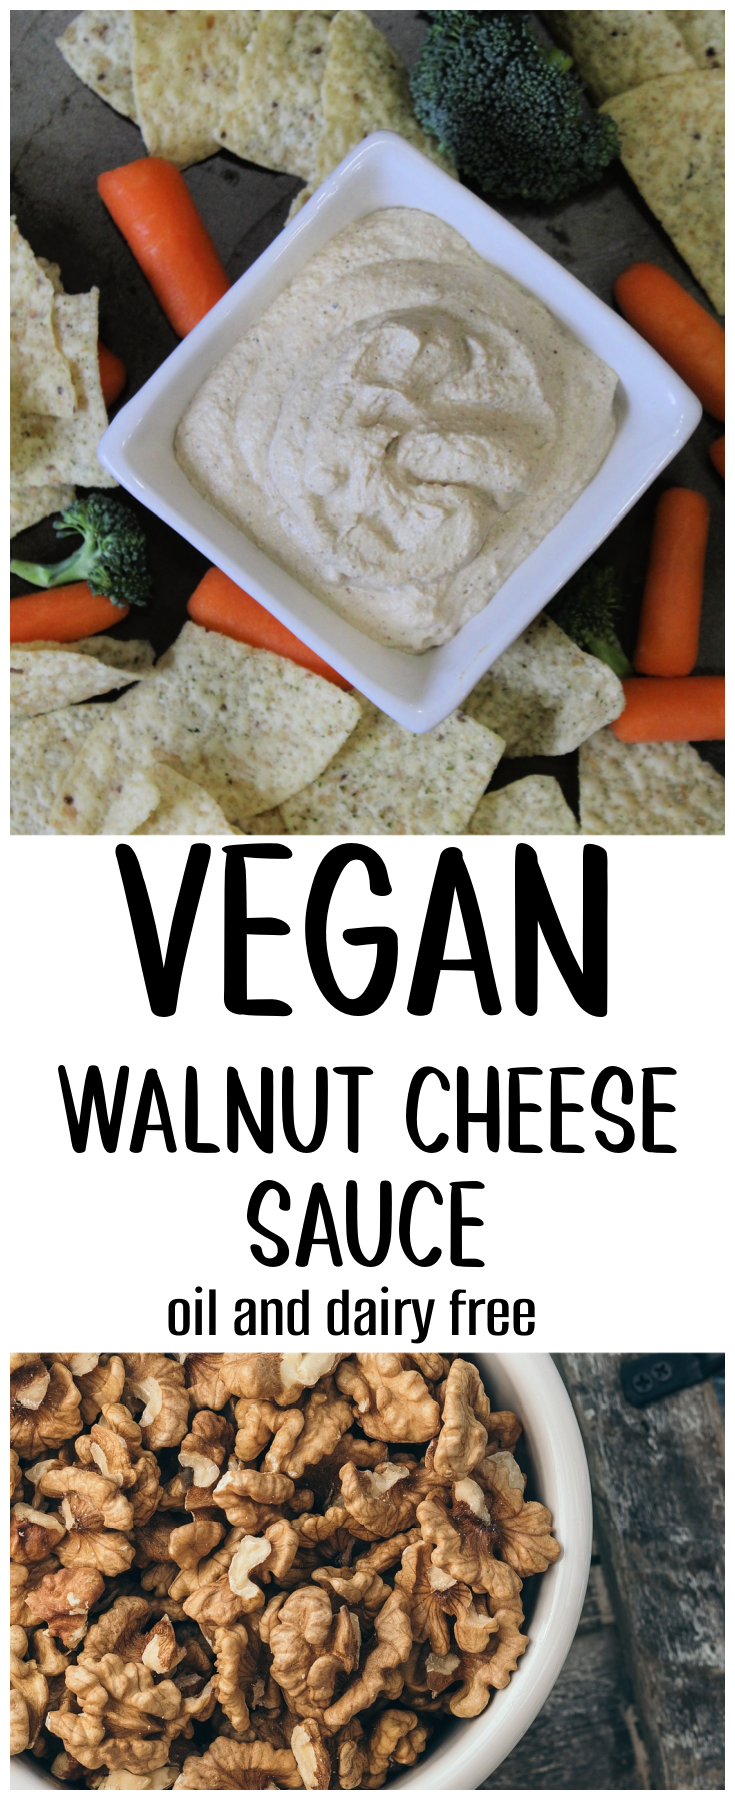 This Vegan Walnut Cheese Sauce is made in 5 minutes or less with just 5 simple ingredients - oil and dairy free!